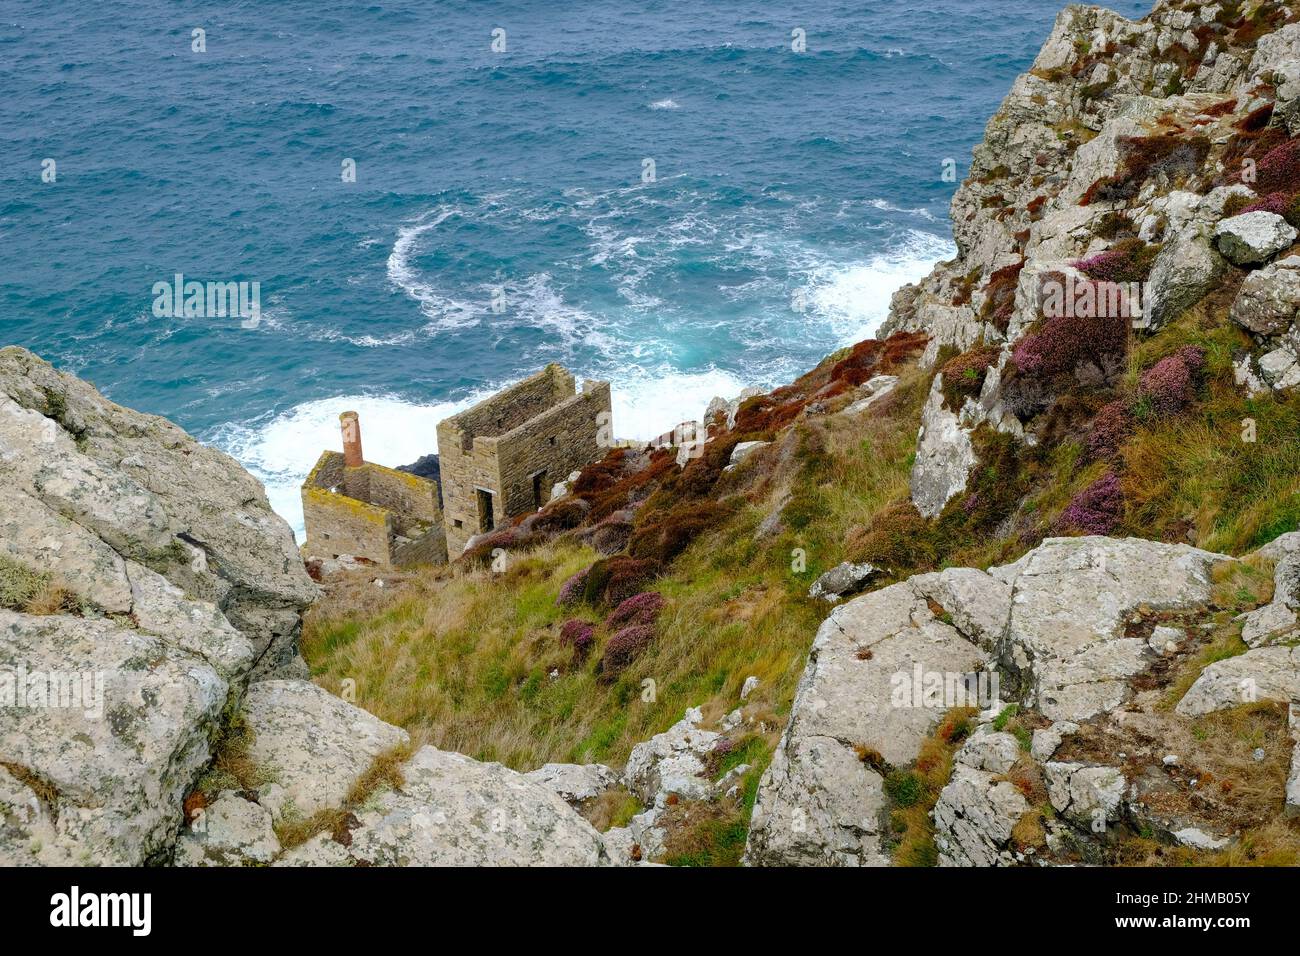 August 2018: Ruins of tin mining Pumping Engine House at Wheal Coates, St Agnes, Cornwall, UK Stock Photo